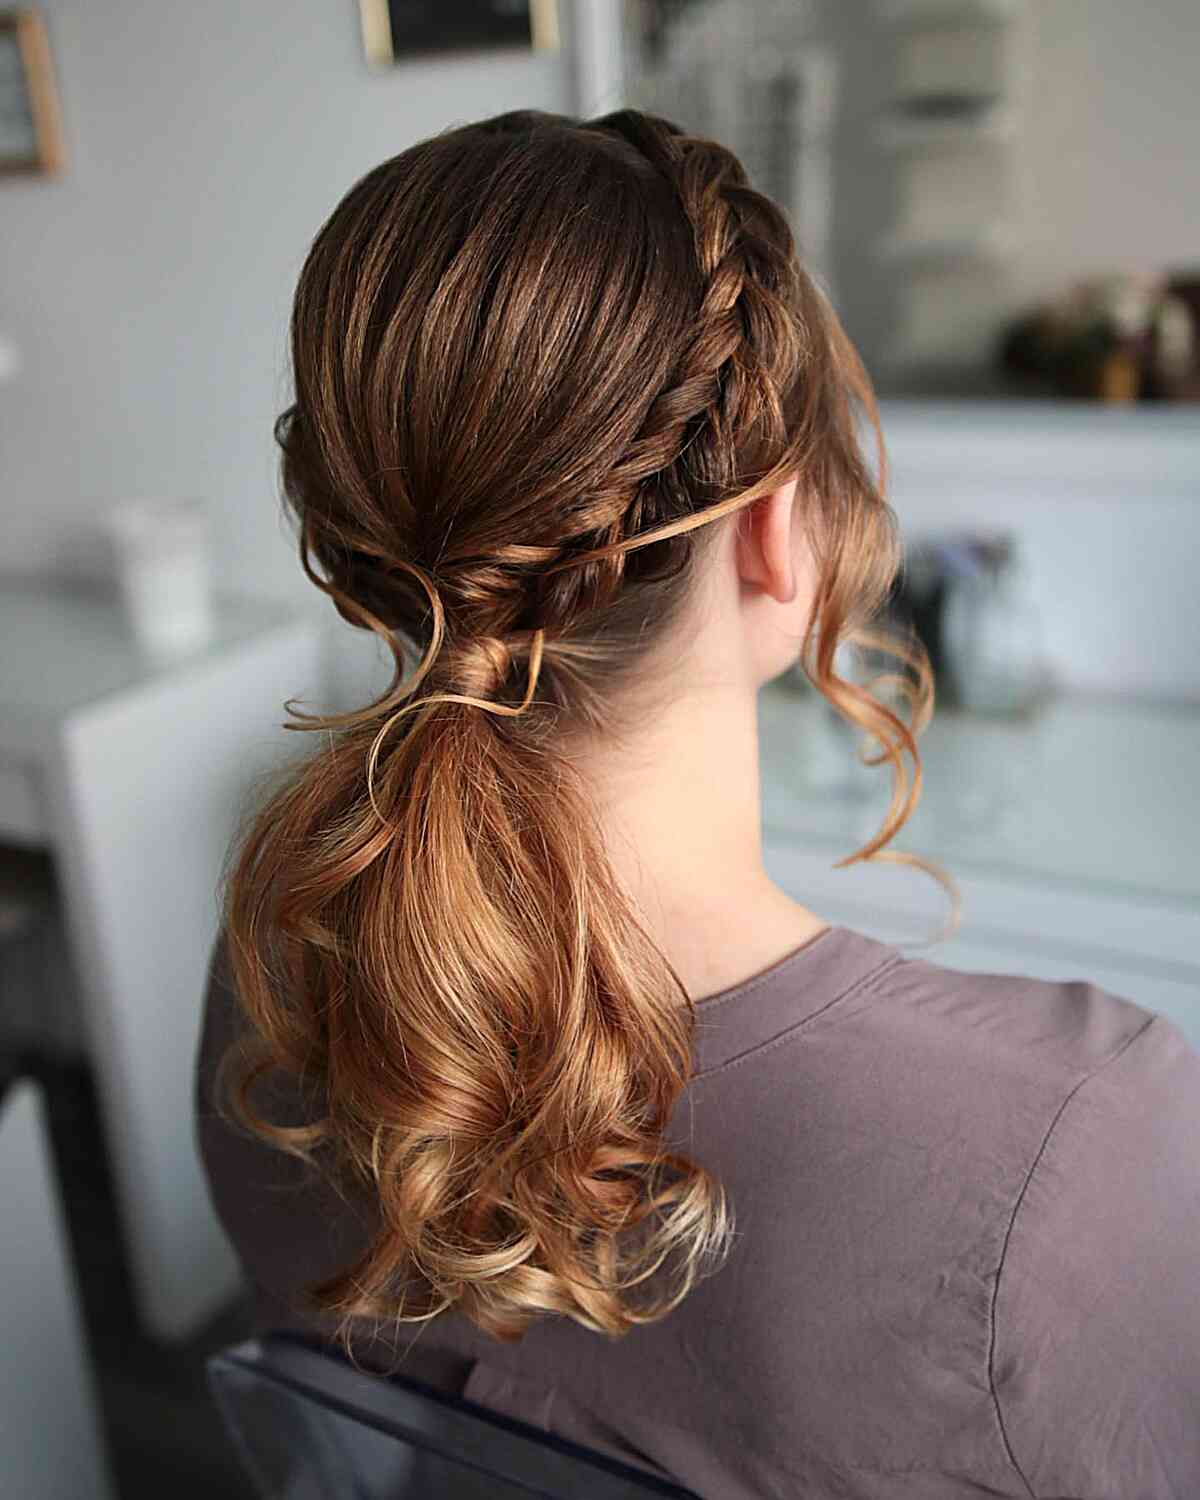 Medium Low Ponytail with Side Braids for Your Prom